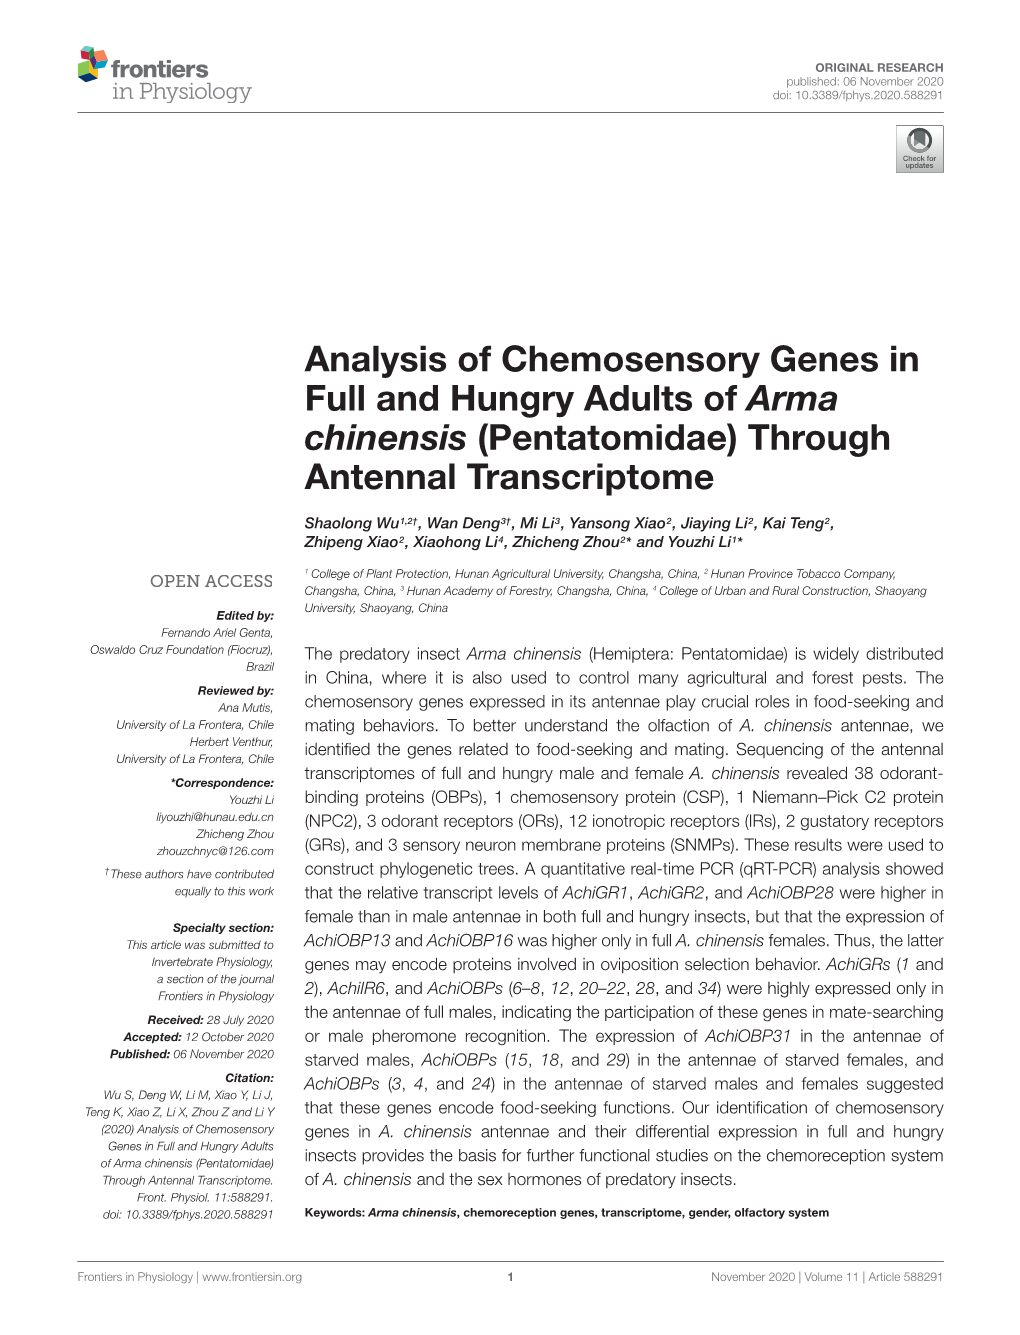 Analysis of Chemosensory Genes in Full and Hungry Adults of Arma Chinensis (Pentatomidae) Through Antennal Transcriptome